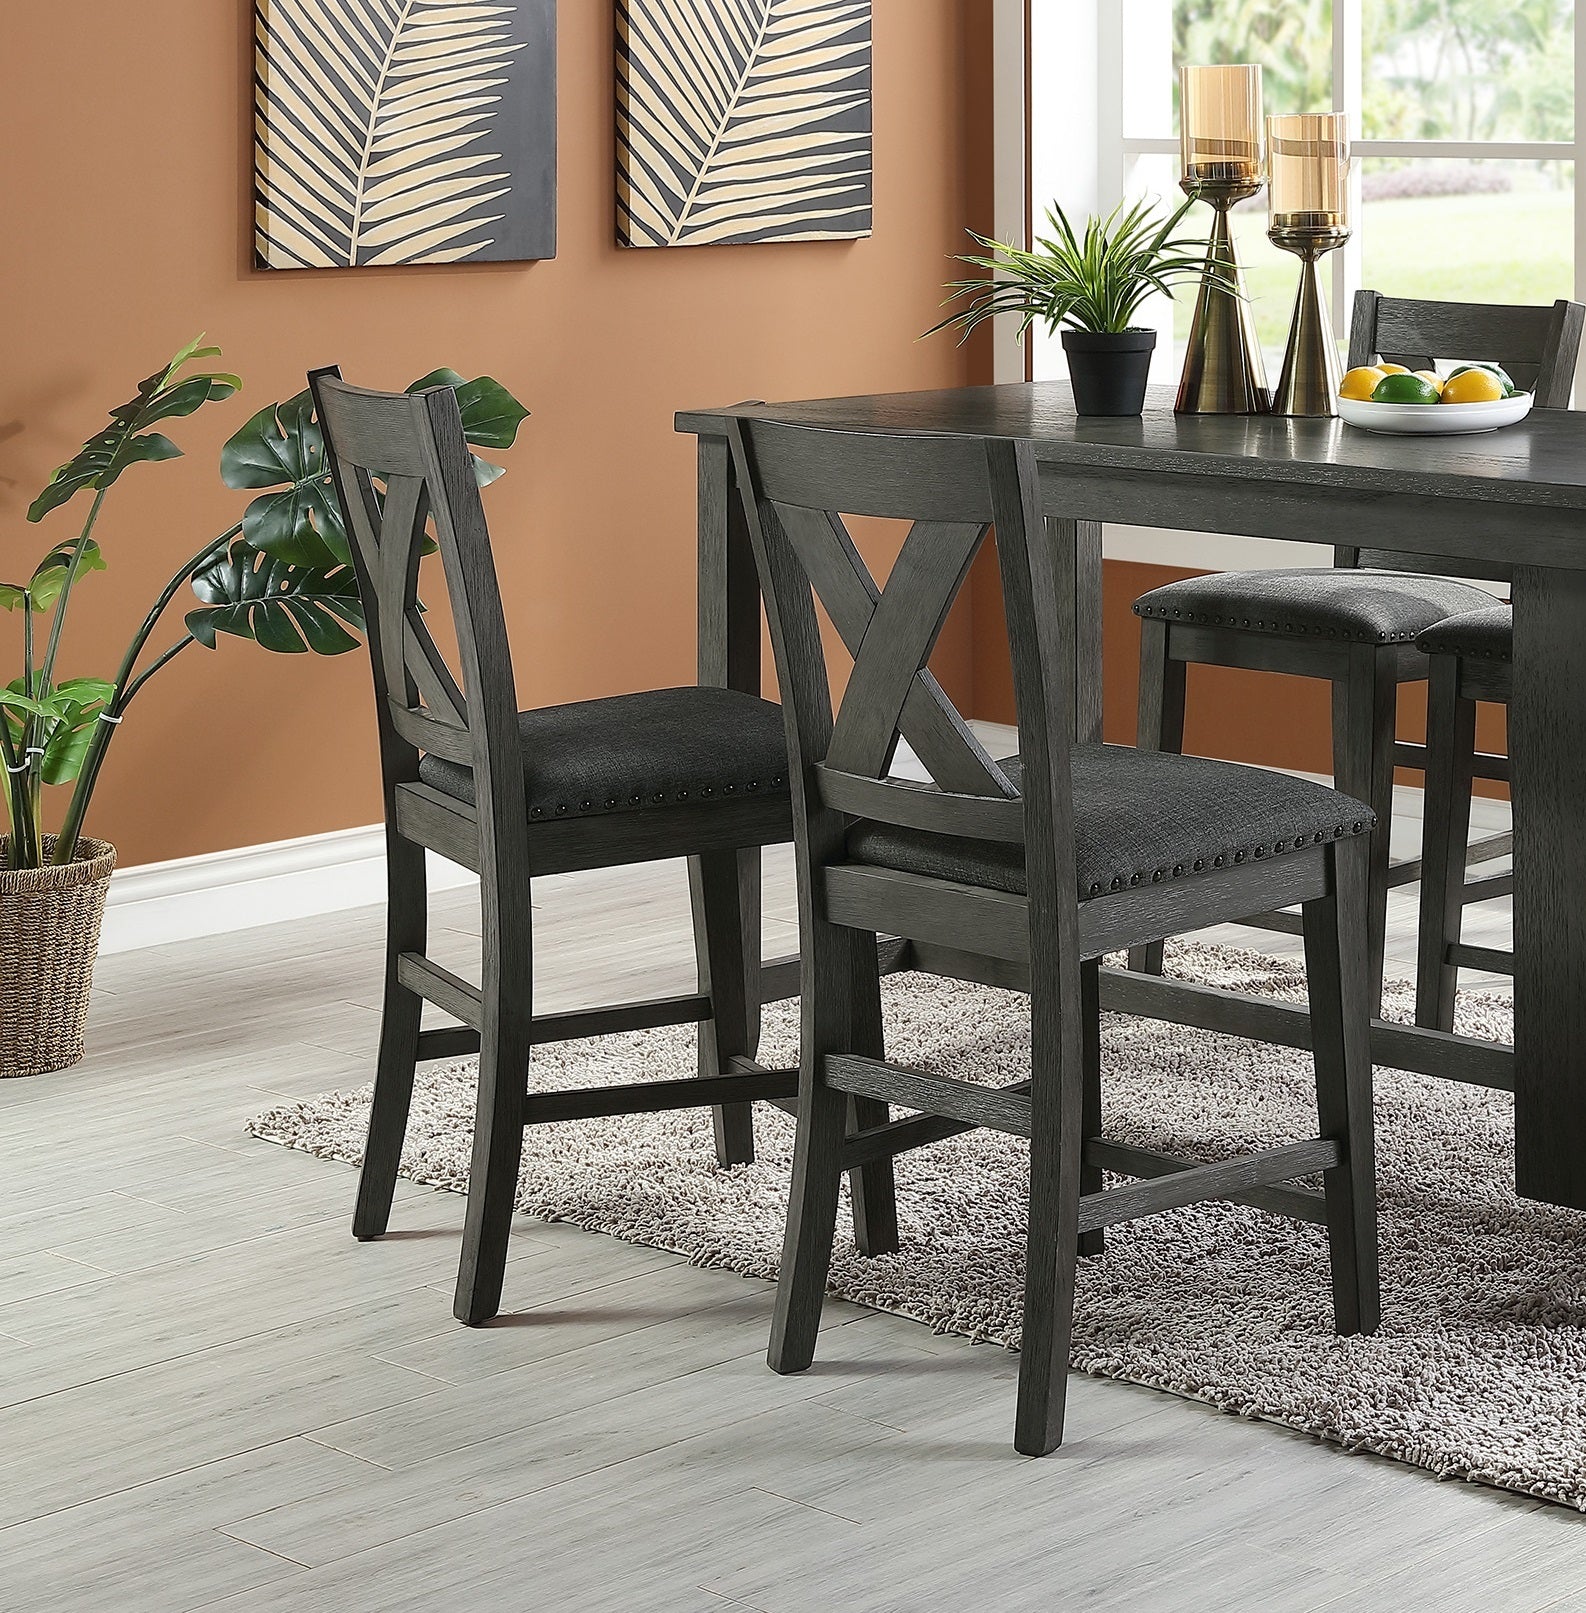 Modern Contemporary Dining Room Furniture Chairs Set gray wash-gray-dining room-classic-modern-dining